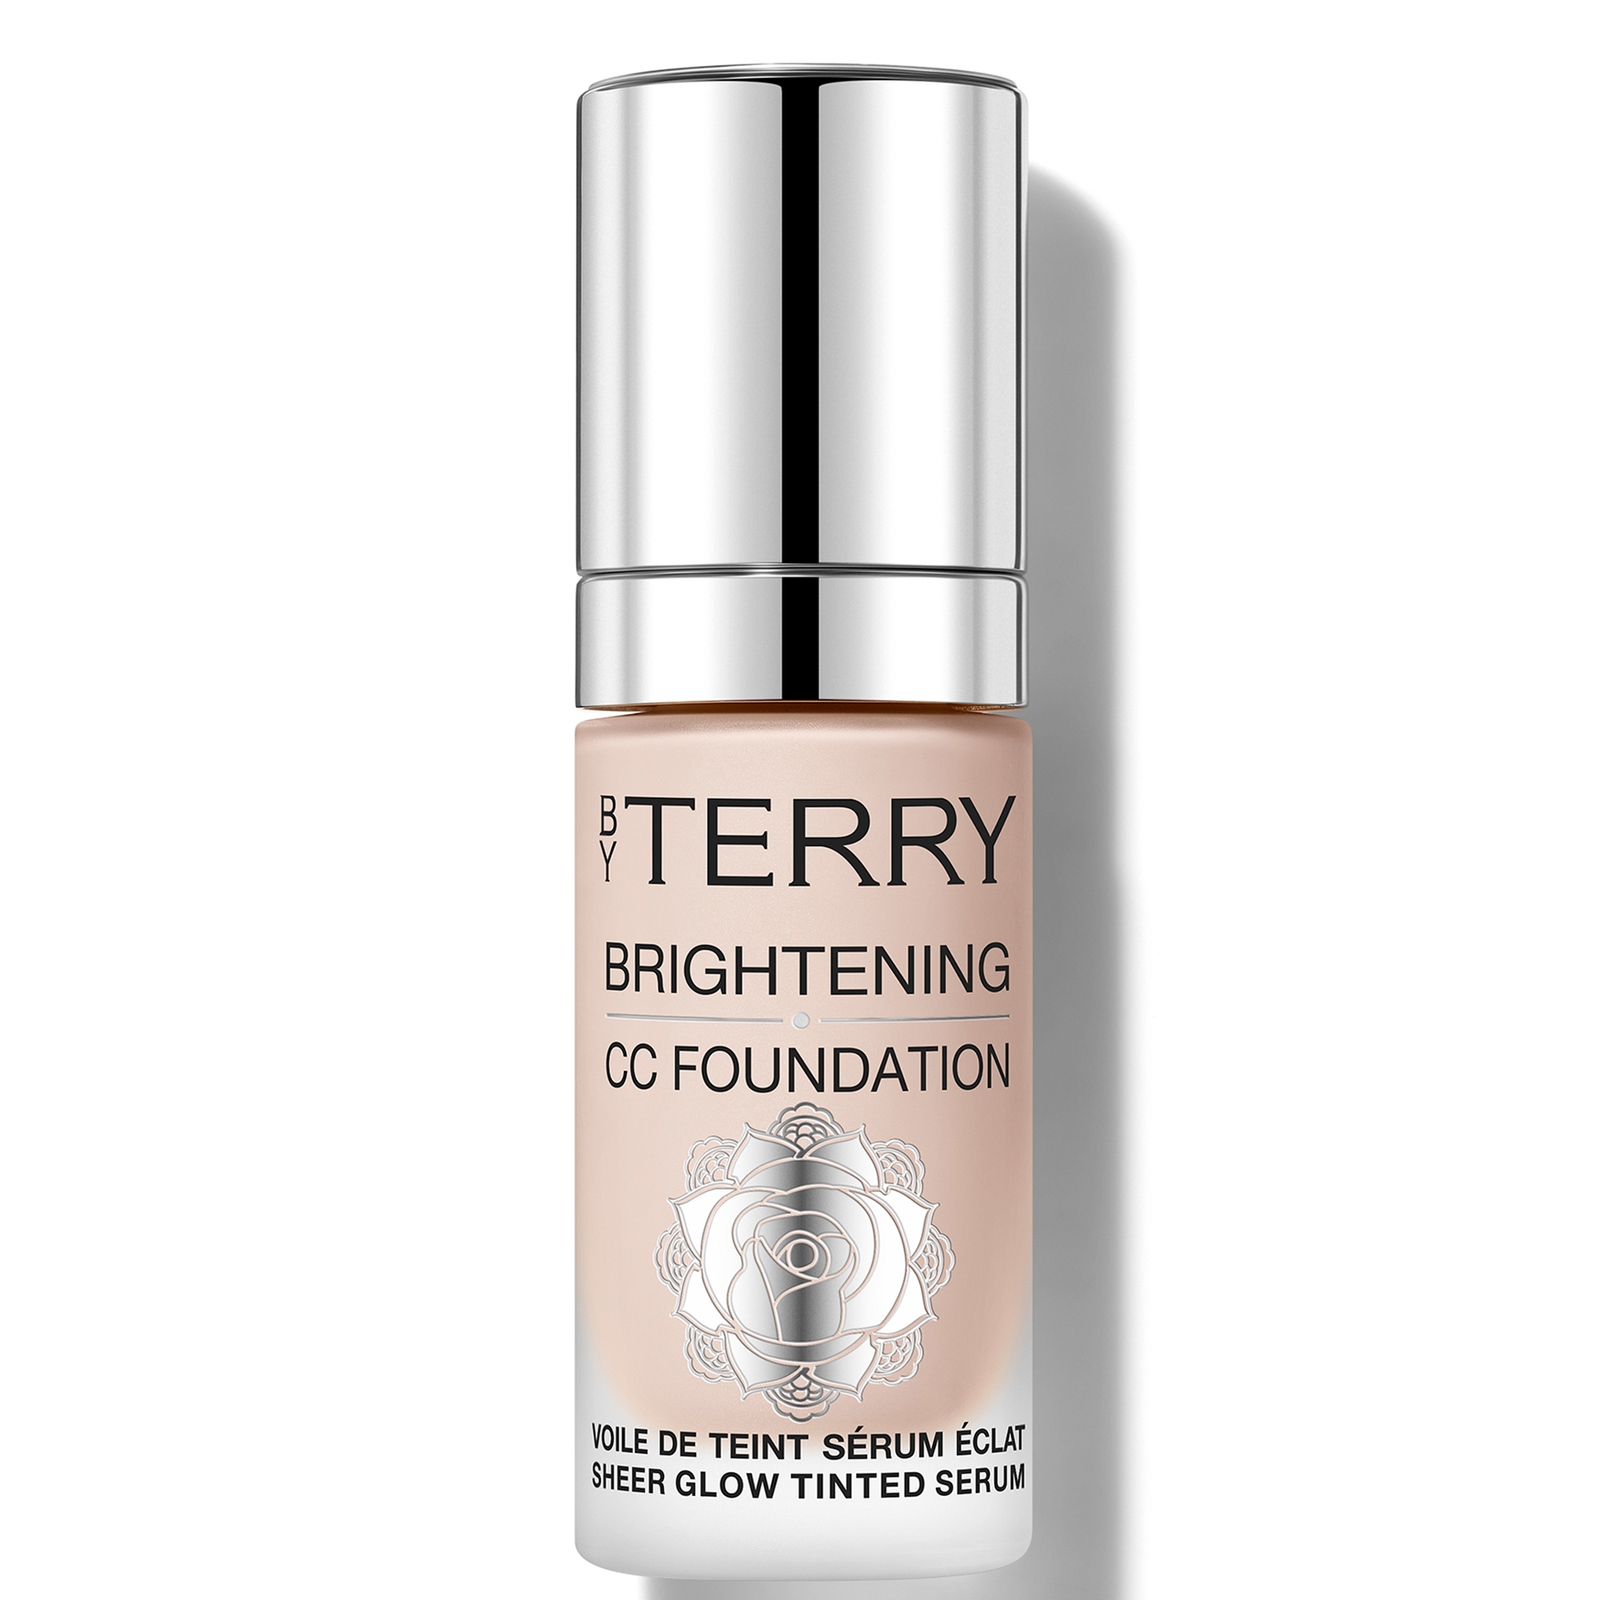 By Terry Brightening Cc Foundation 30ml (various Shades) - 1c - Fair Cool In White